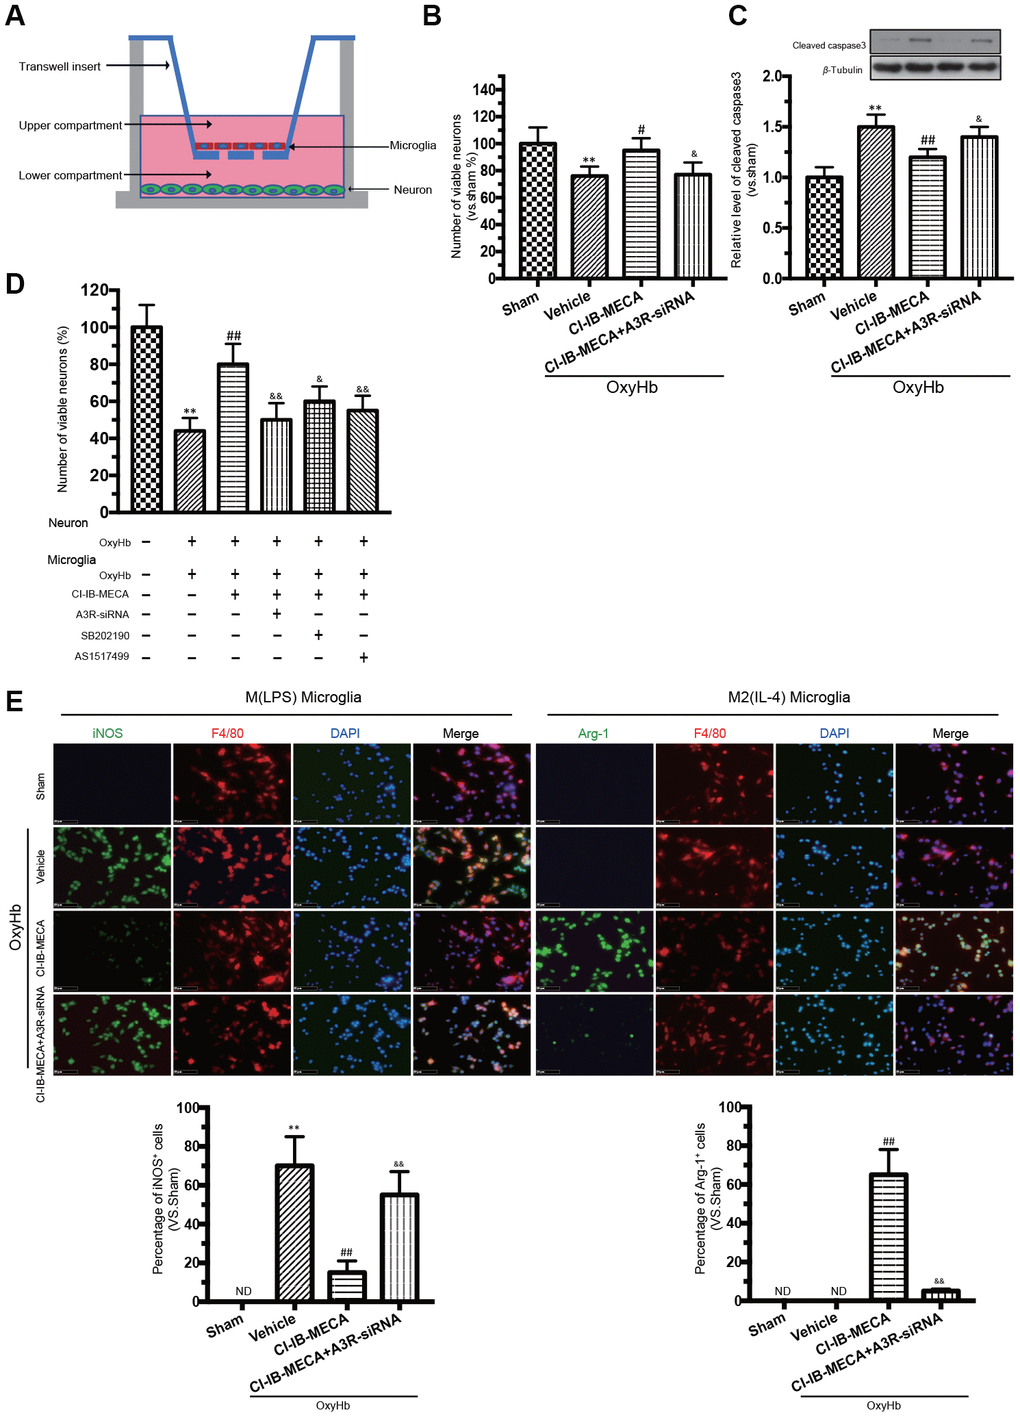 A3R agonist alleviated oxyhemoglobin (OxyHb) induced neuronal apoptosis through “direct” and “indirect” effects, accompanied by a significant microglia M(IL-4) polarization in vitro. (A) Mimetic diagram of the Transwell co-culture system. (B, C) The effect of A3R agonist on neuronal apoptosis and expression of caspase 3. (D) Effects of CI-IB-MECA and P38 and STAT6 inhibitors on neuronal apoptosis with a Transwell co-culture system. (E) Microglia polarized to the classically activated phenotype after the treatment with OxyHb, and CI-IB-MECA increased the number of Arg-1-positive and decreased the iNOS-positive microglia in vitro. Quantitative analysis of the percentage of iNOS- and Arg-1-positive cells in different groups under the indicated treatments. n=5 in each group. Values are shown as the mean ± SD. **p p p p 